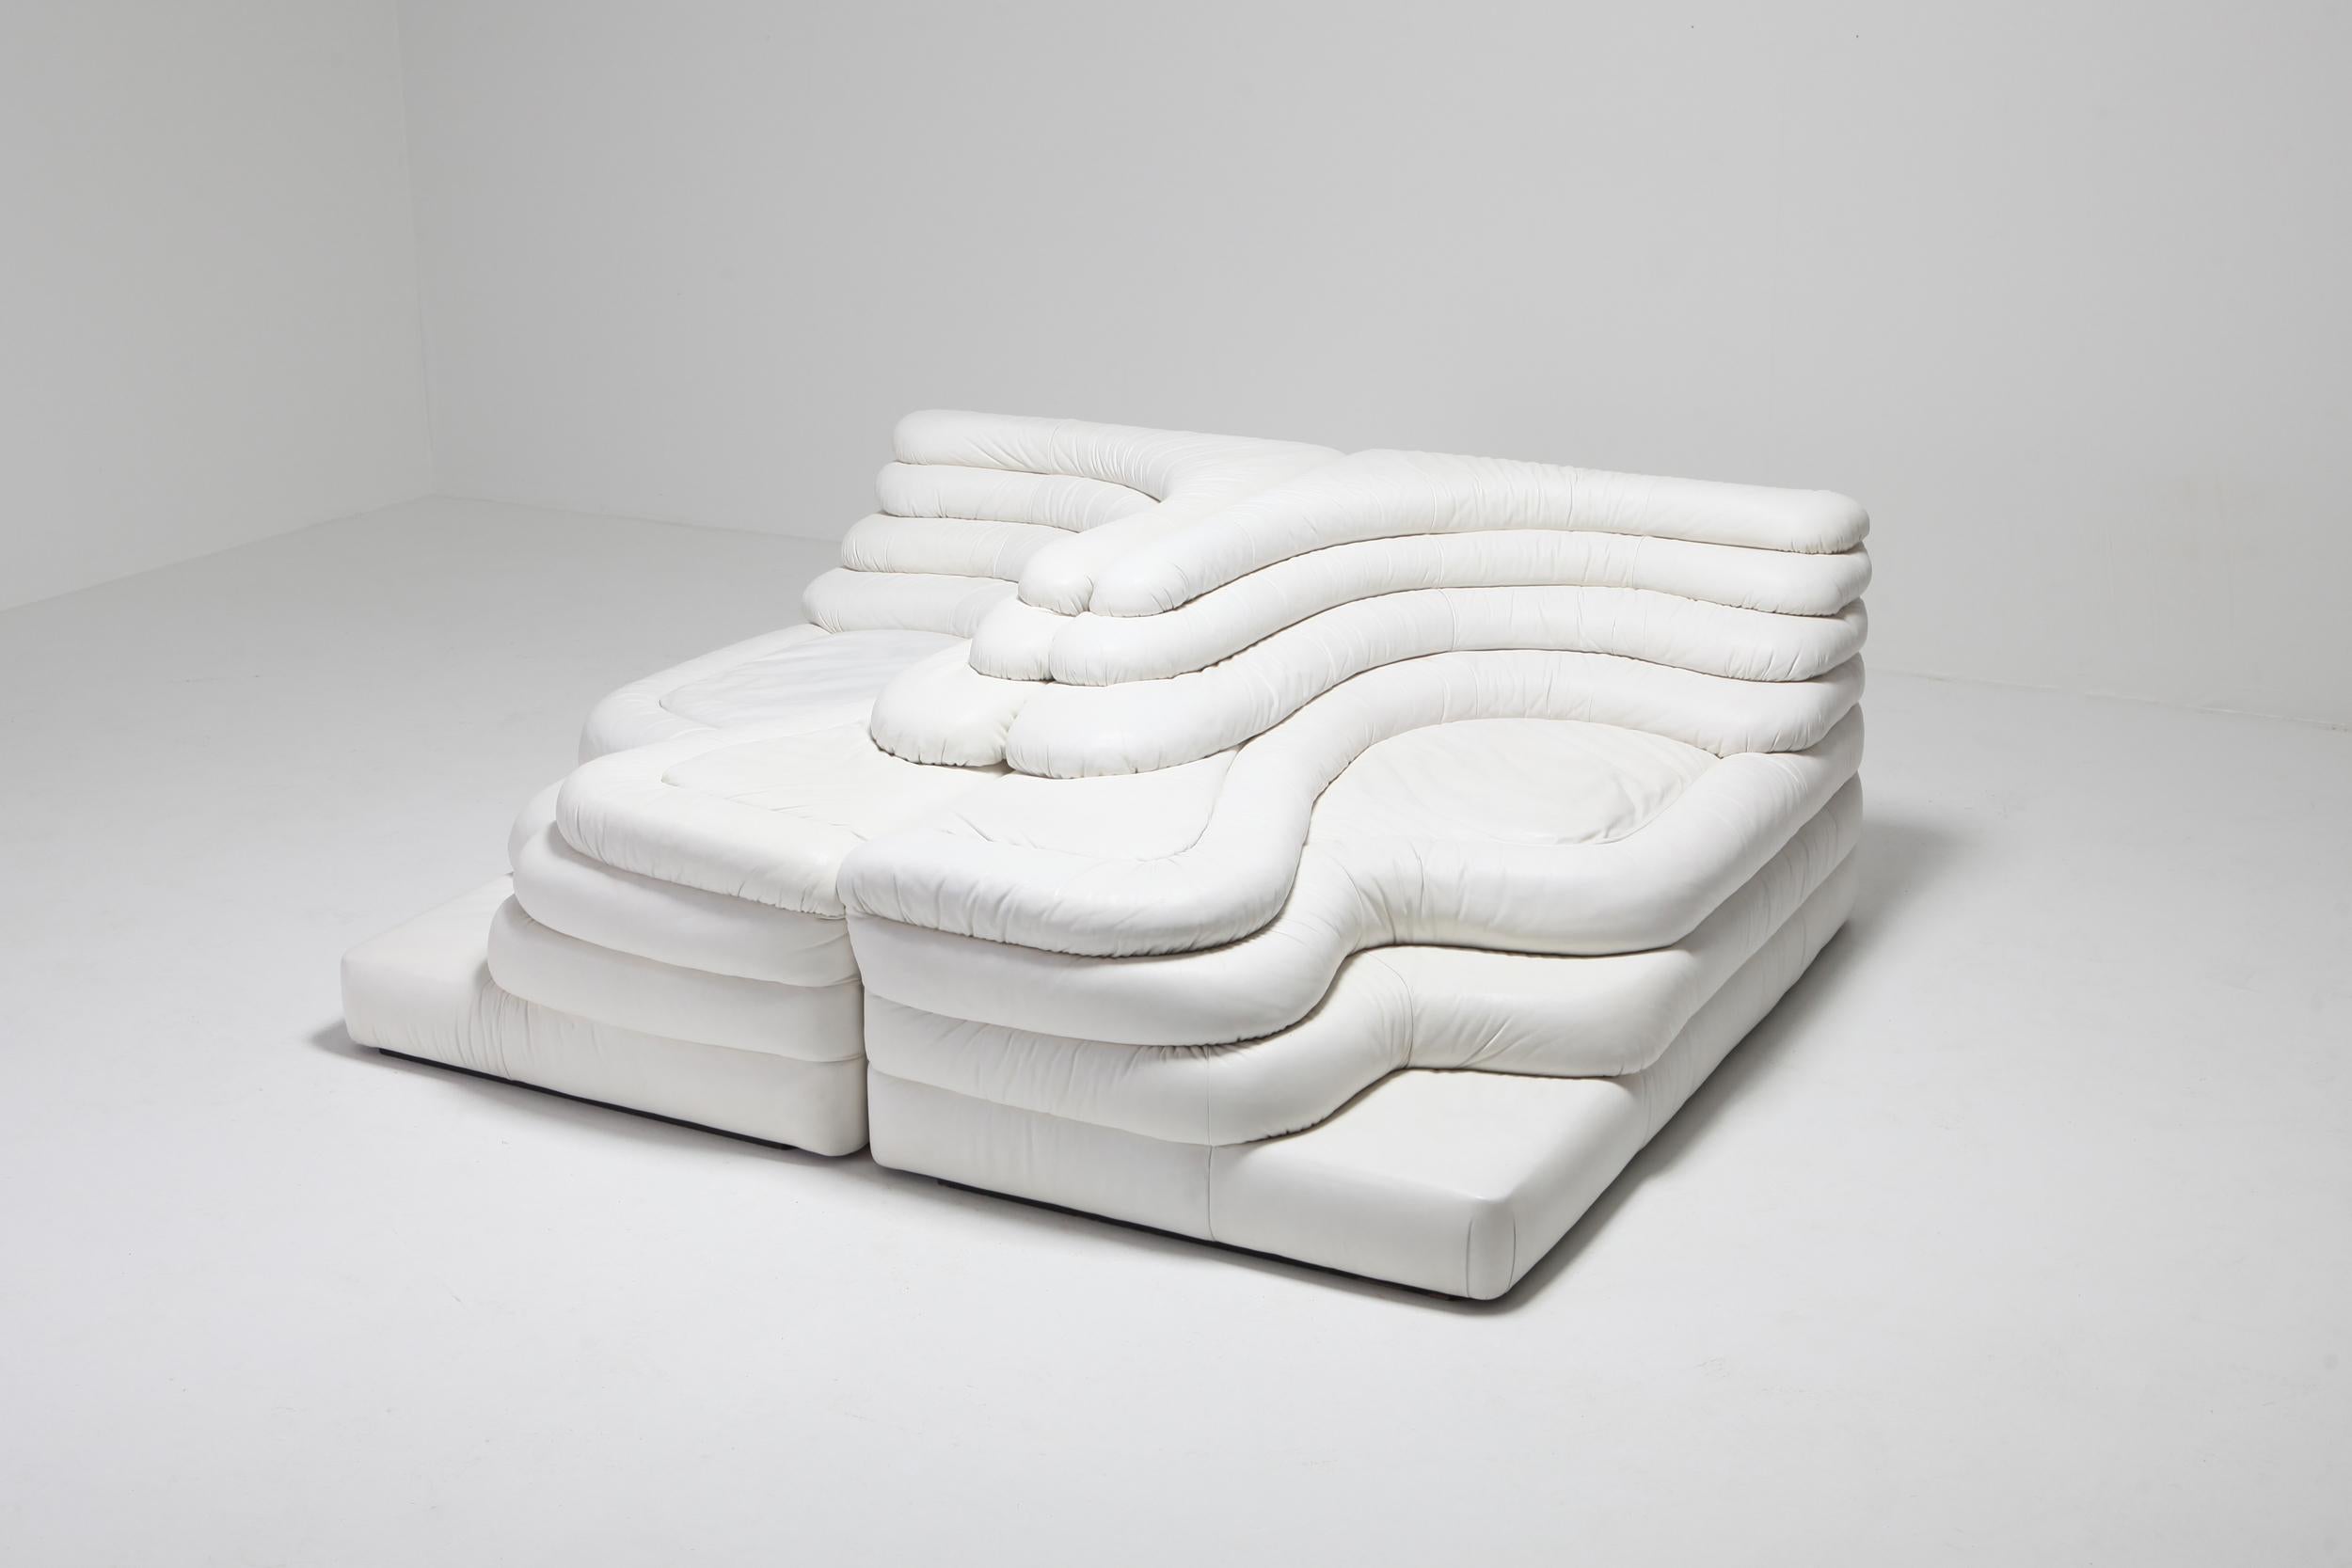 Late 20th Century De Sede 'Terrazza' Lounge Chair in White Leather 1972 by U. Klug & Ueli Berger